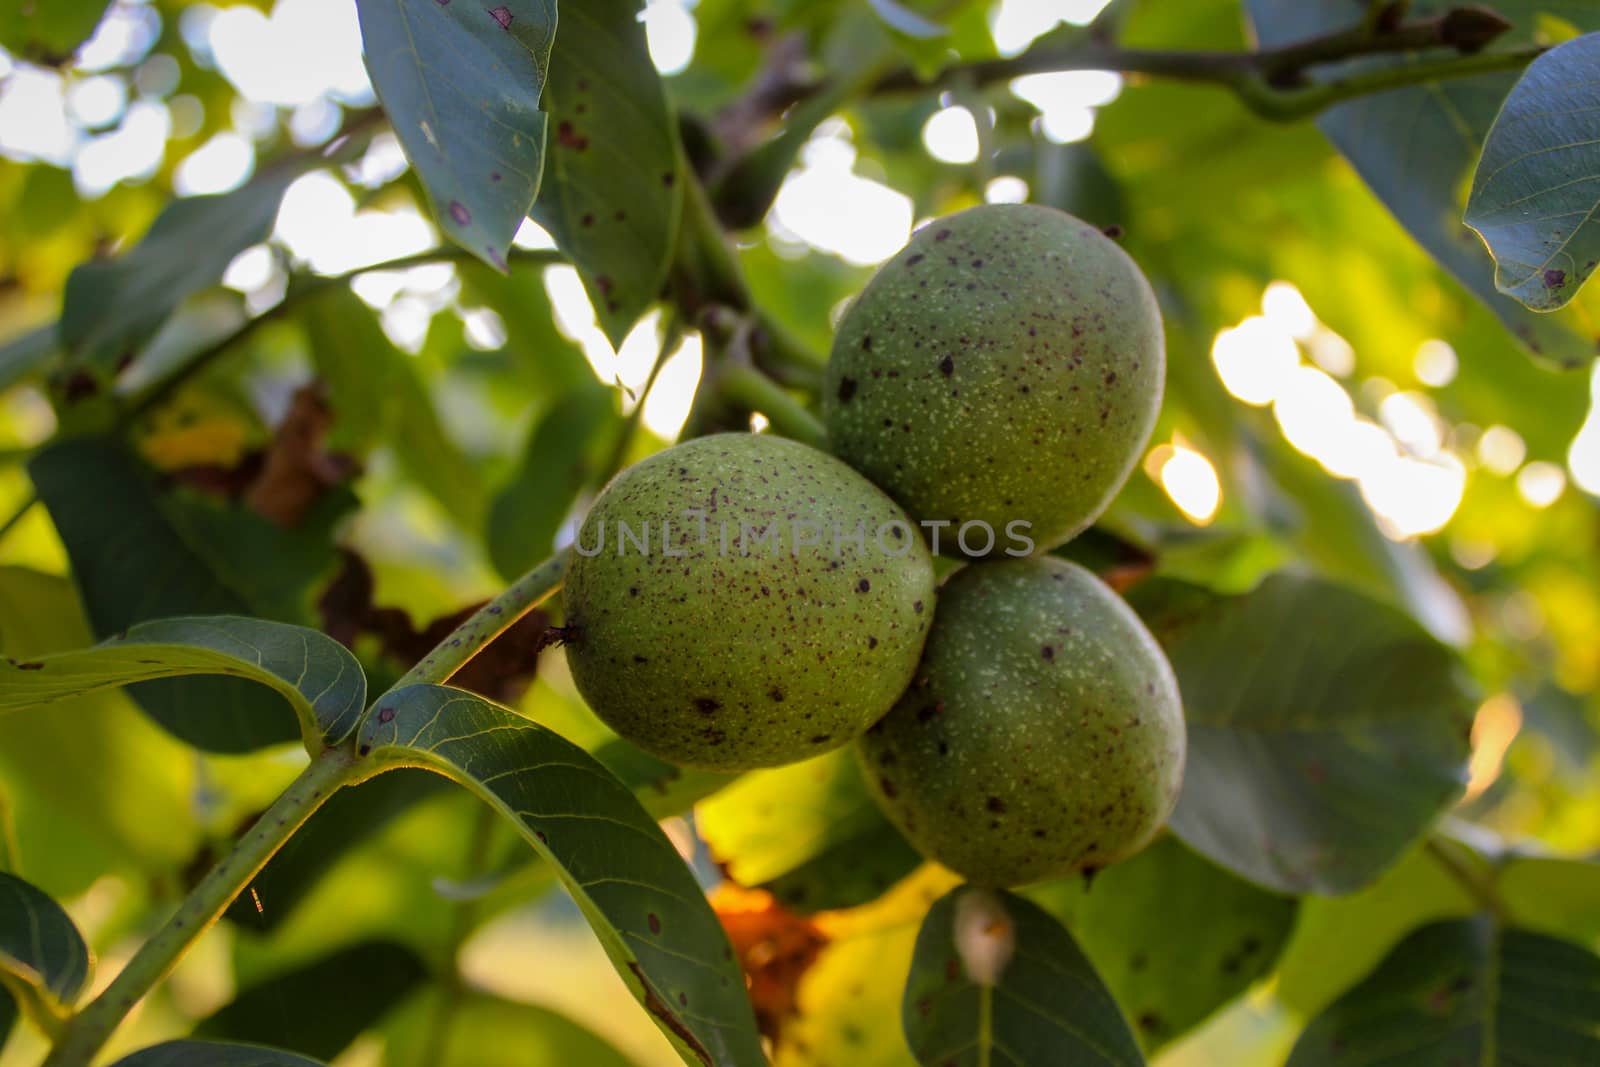 Green unripe walnuts on a branch. Three walnuts on a branch with a leaves in the background. Zavidovici, Bosnia and Herzegovina.